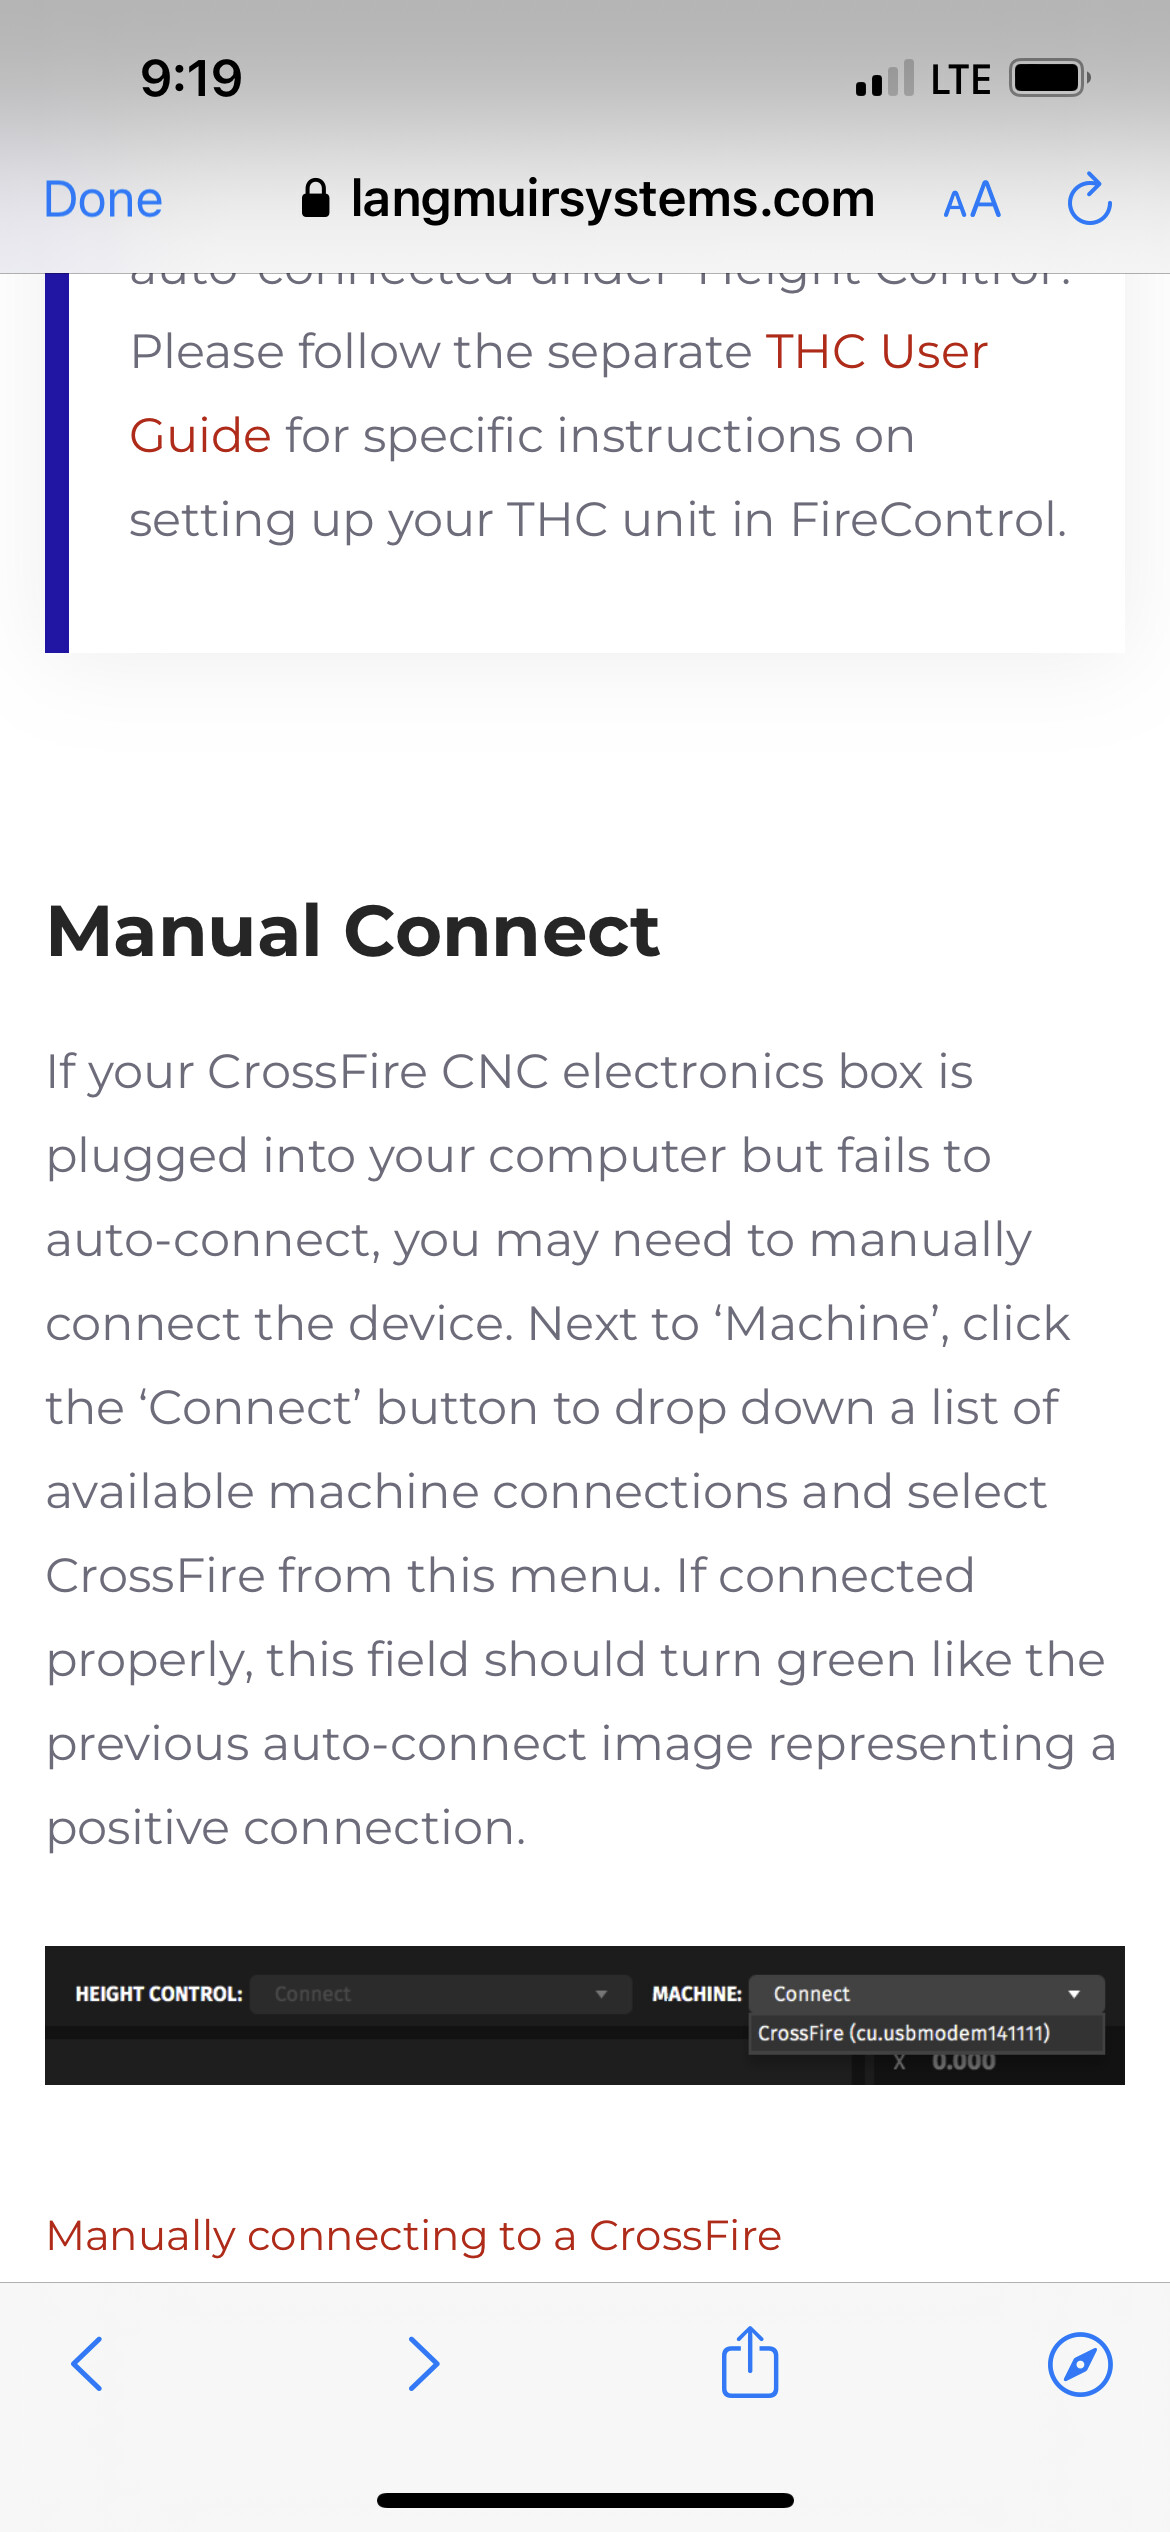 Mini PC questions or suggestions - CrossFire ® PRO - Langmuir